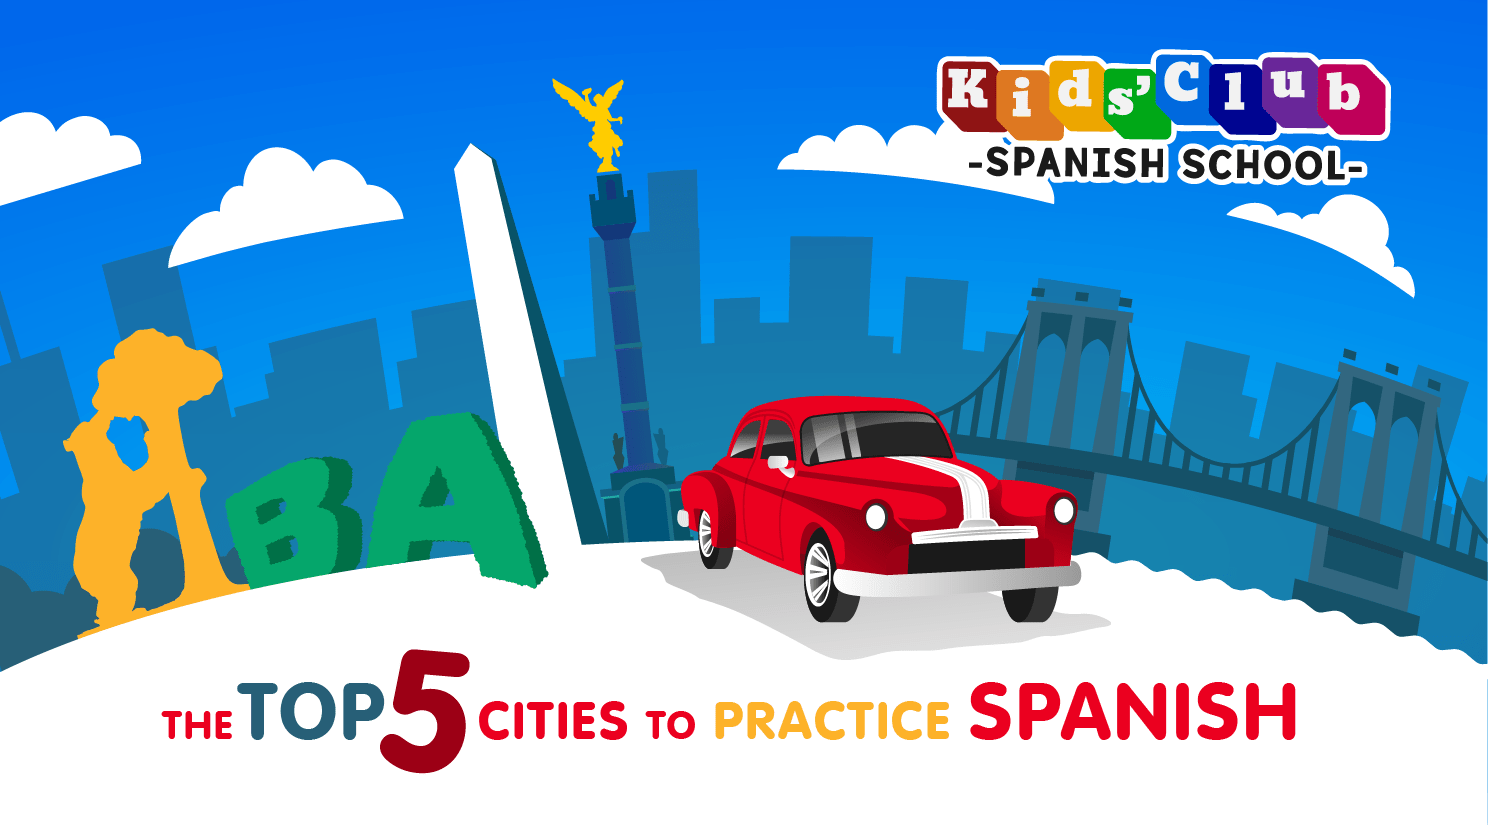 The top 5 cities to practice Spanish